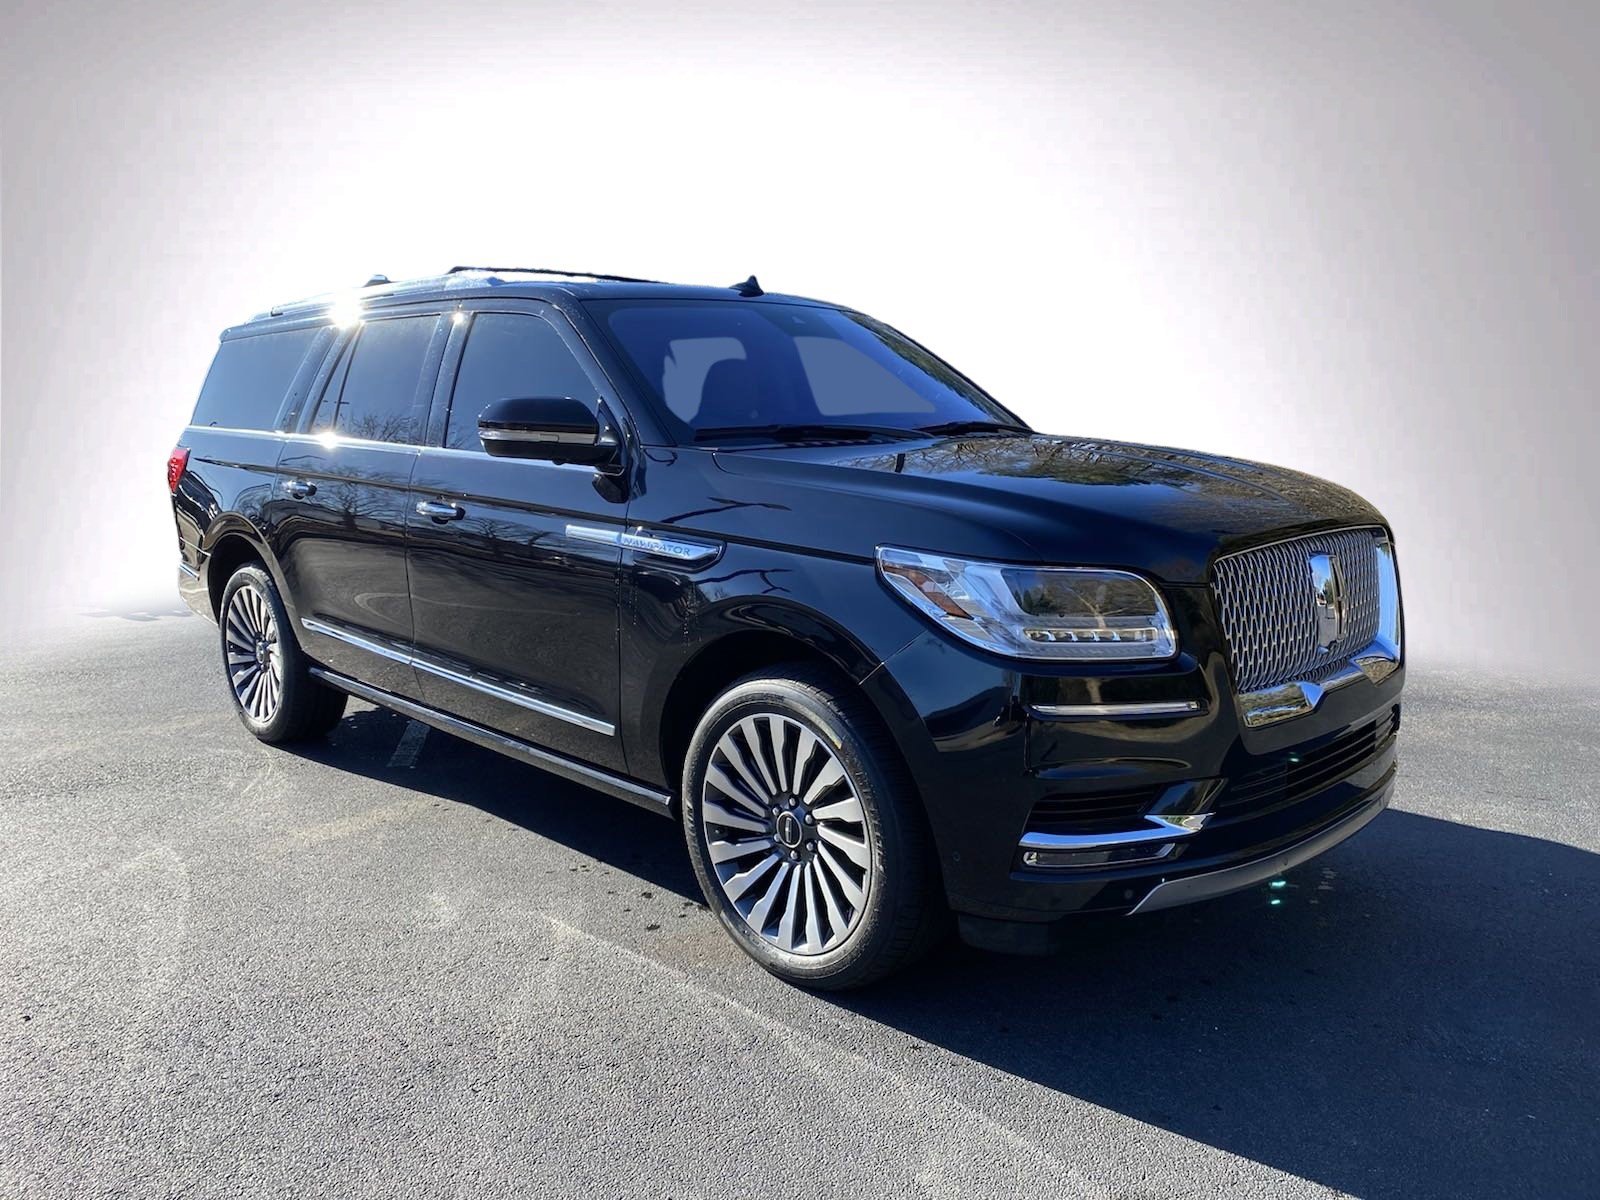 Pre-Owned 2019 Lincoln Navigator L Reserve SUV in Tallahassee #P22736A |  Dale Earnhardt Jr Cadillac